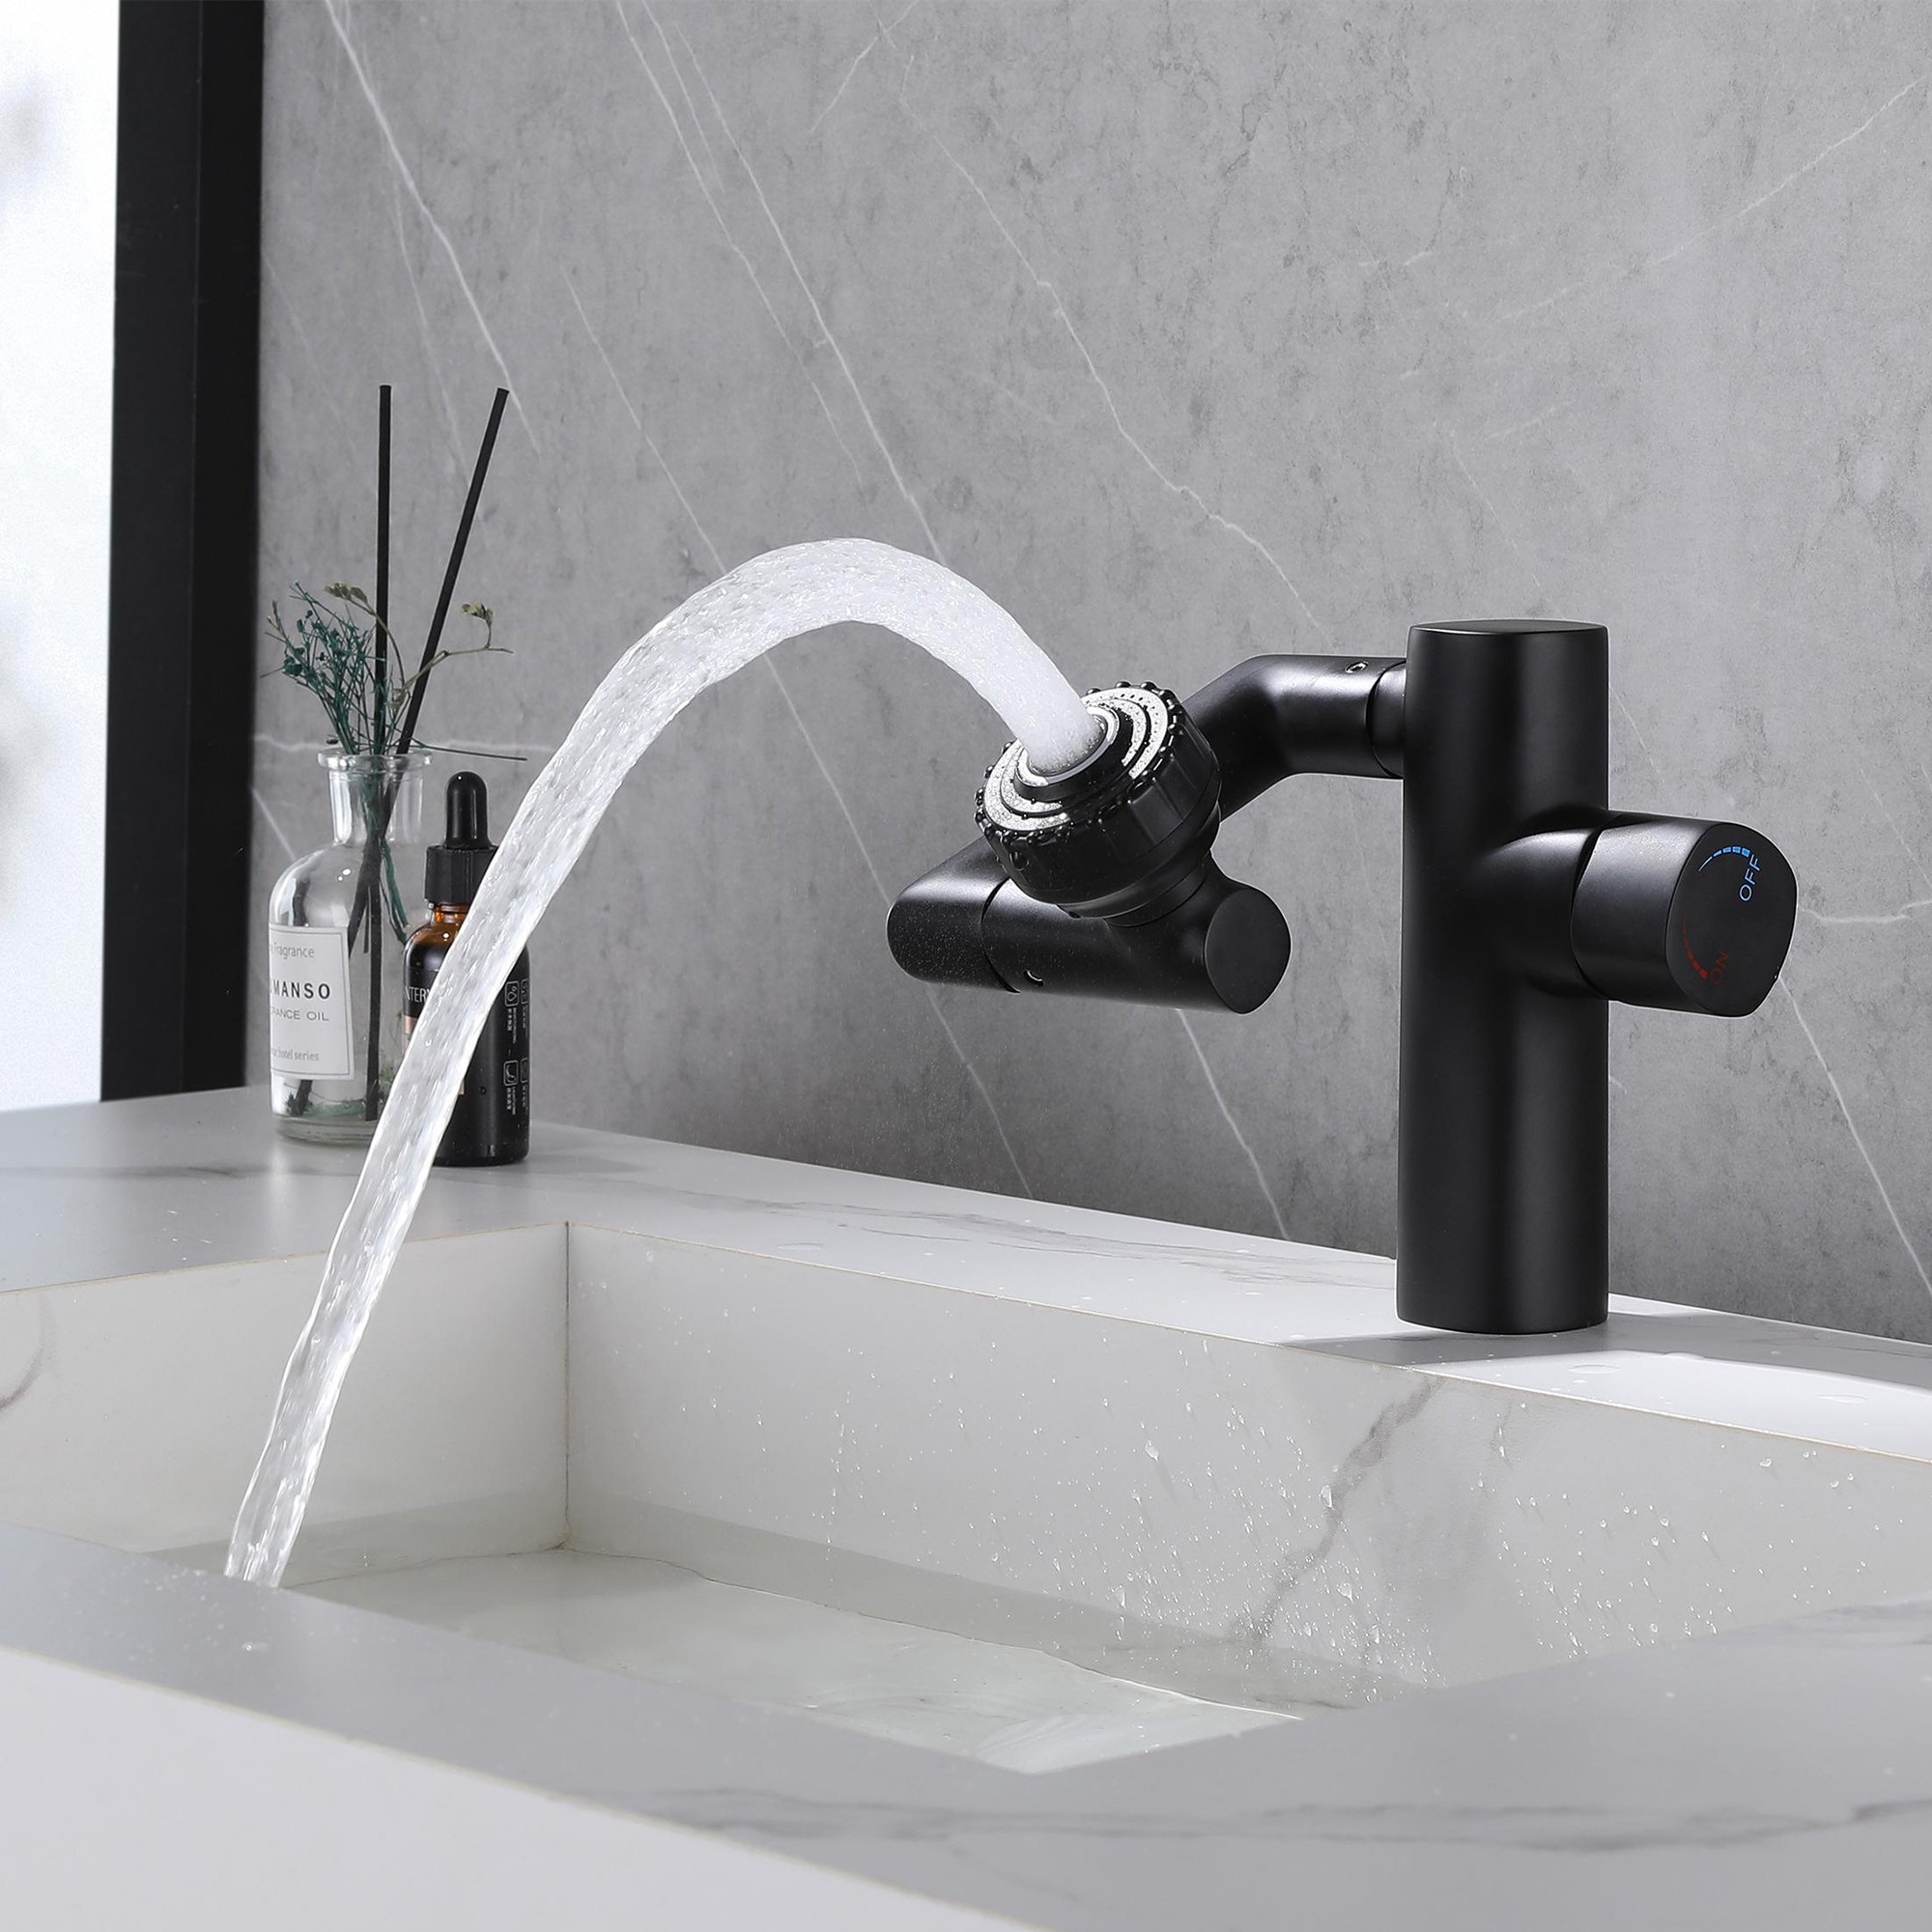 WOWOW Oil Rubbed Bronze bathroom faucet for bathroom sink faucet hole  Lavatory Faucet Handle Vanity Faucet with Drain and Supply Hose Mixer Tap  キッチン